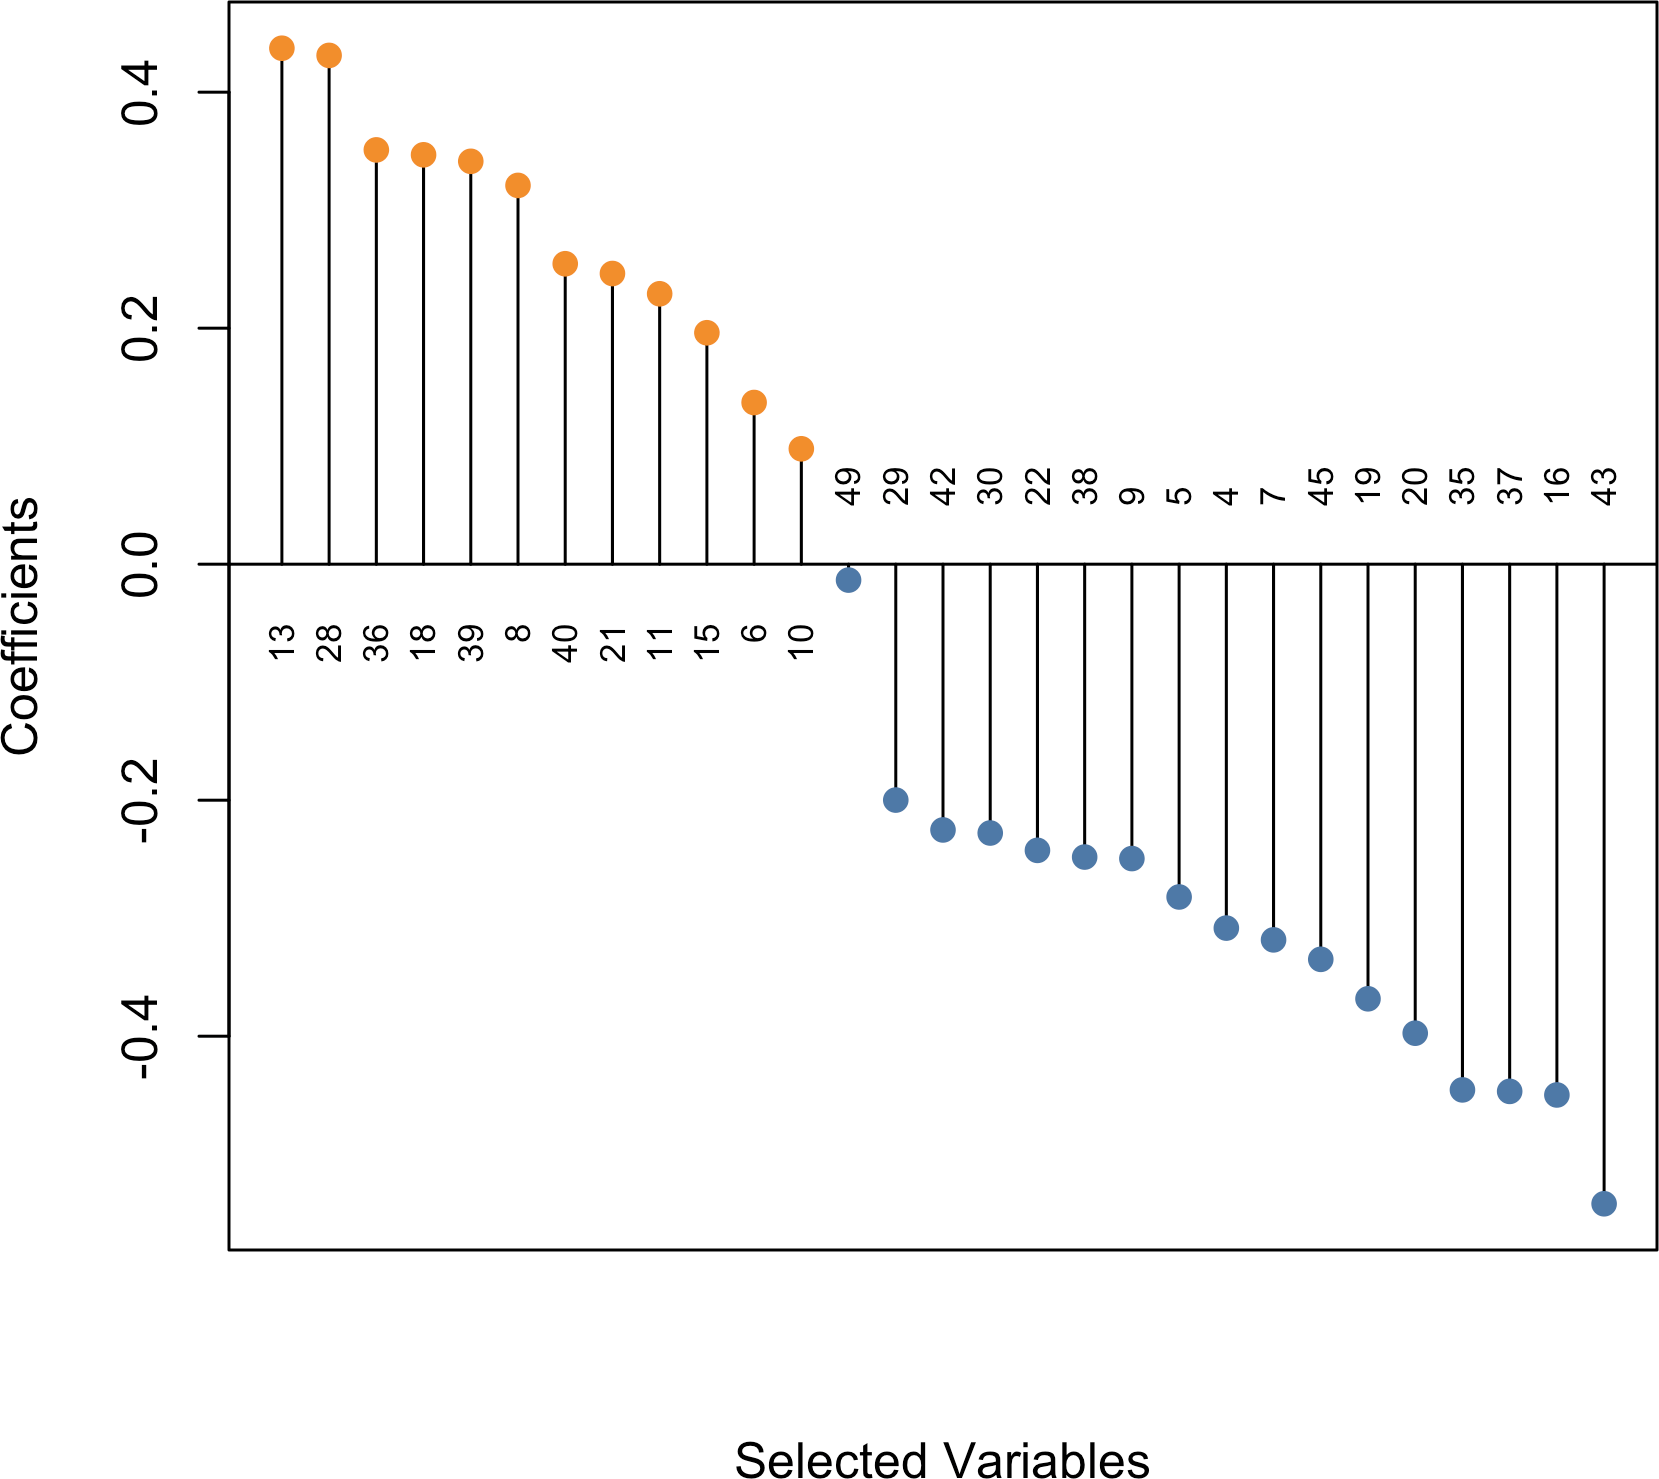 Dot plot showing the non-zero coefficients from the optimal model.